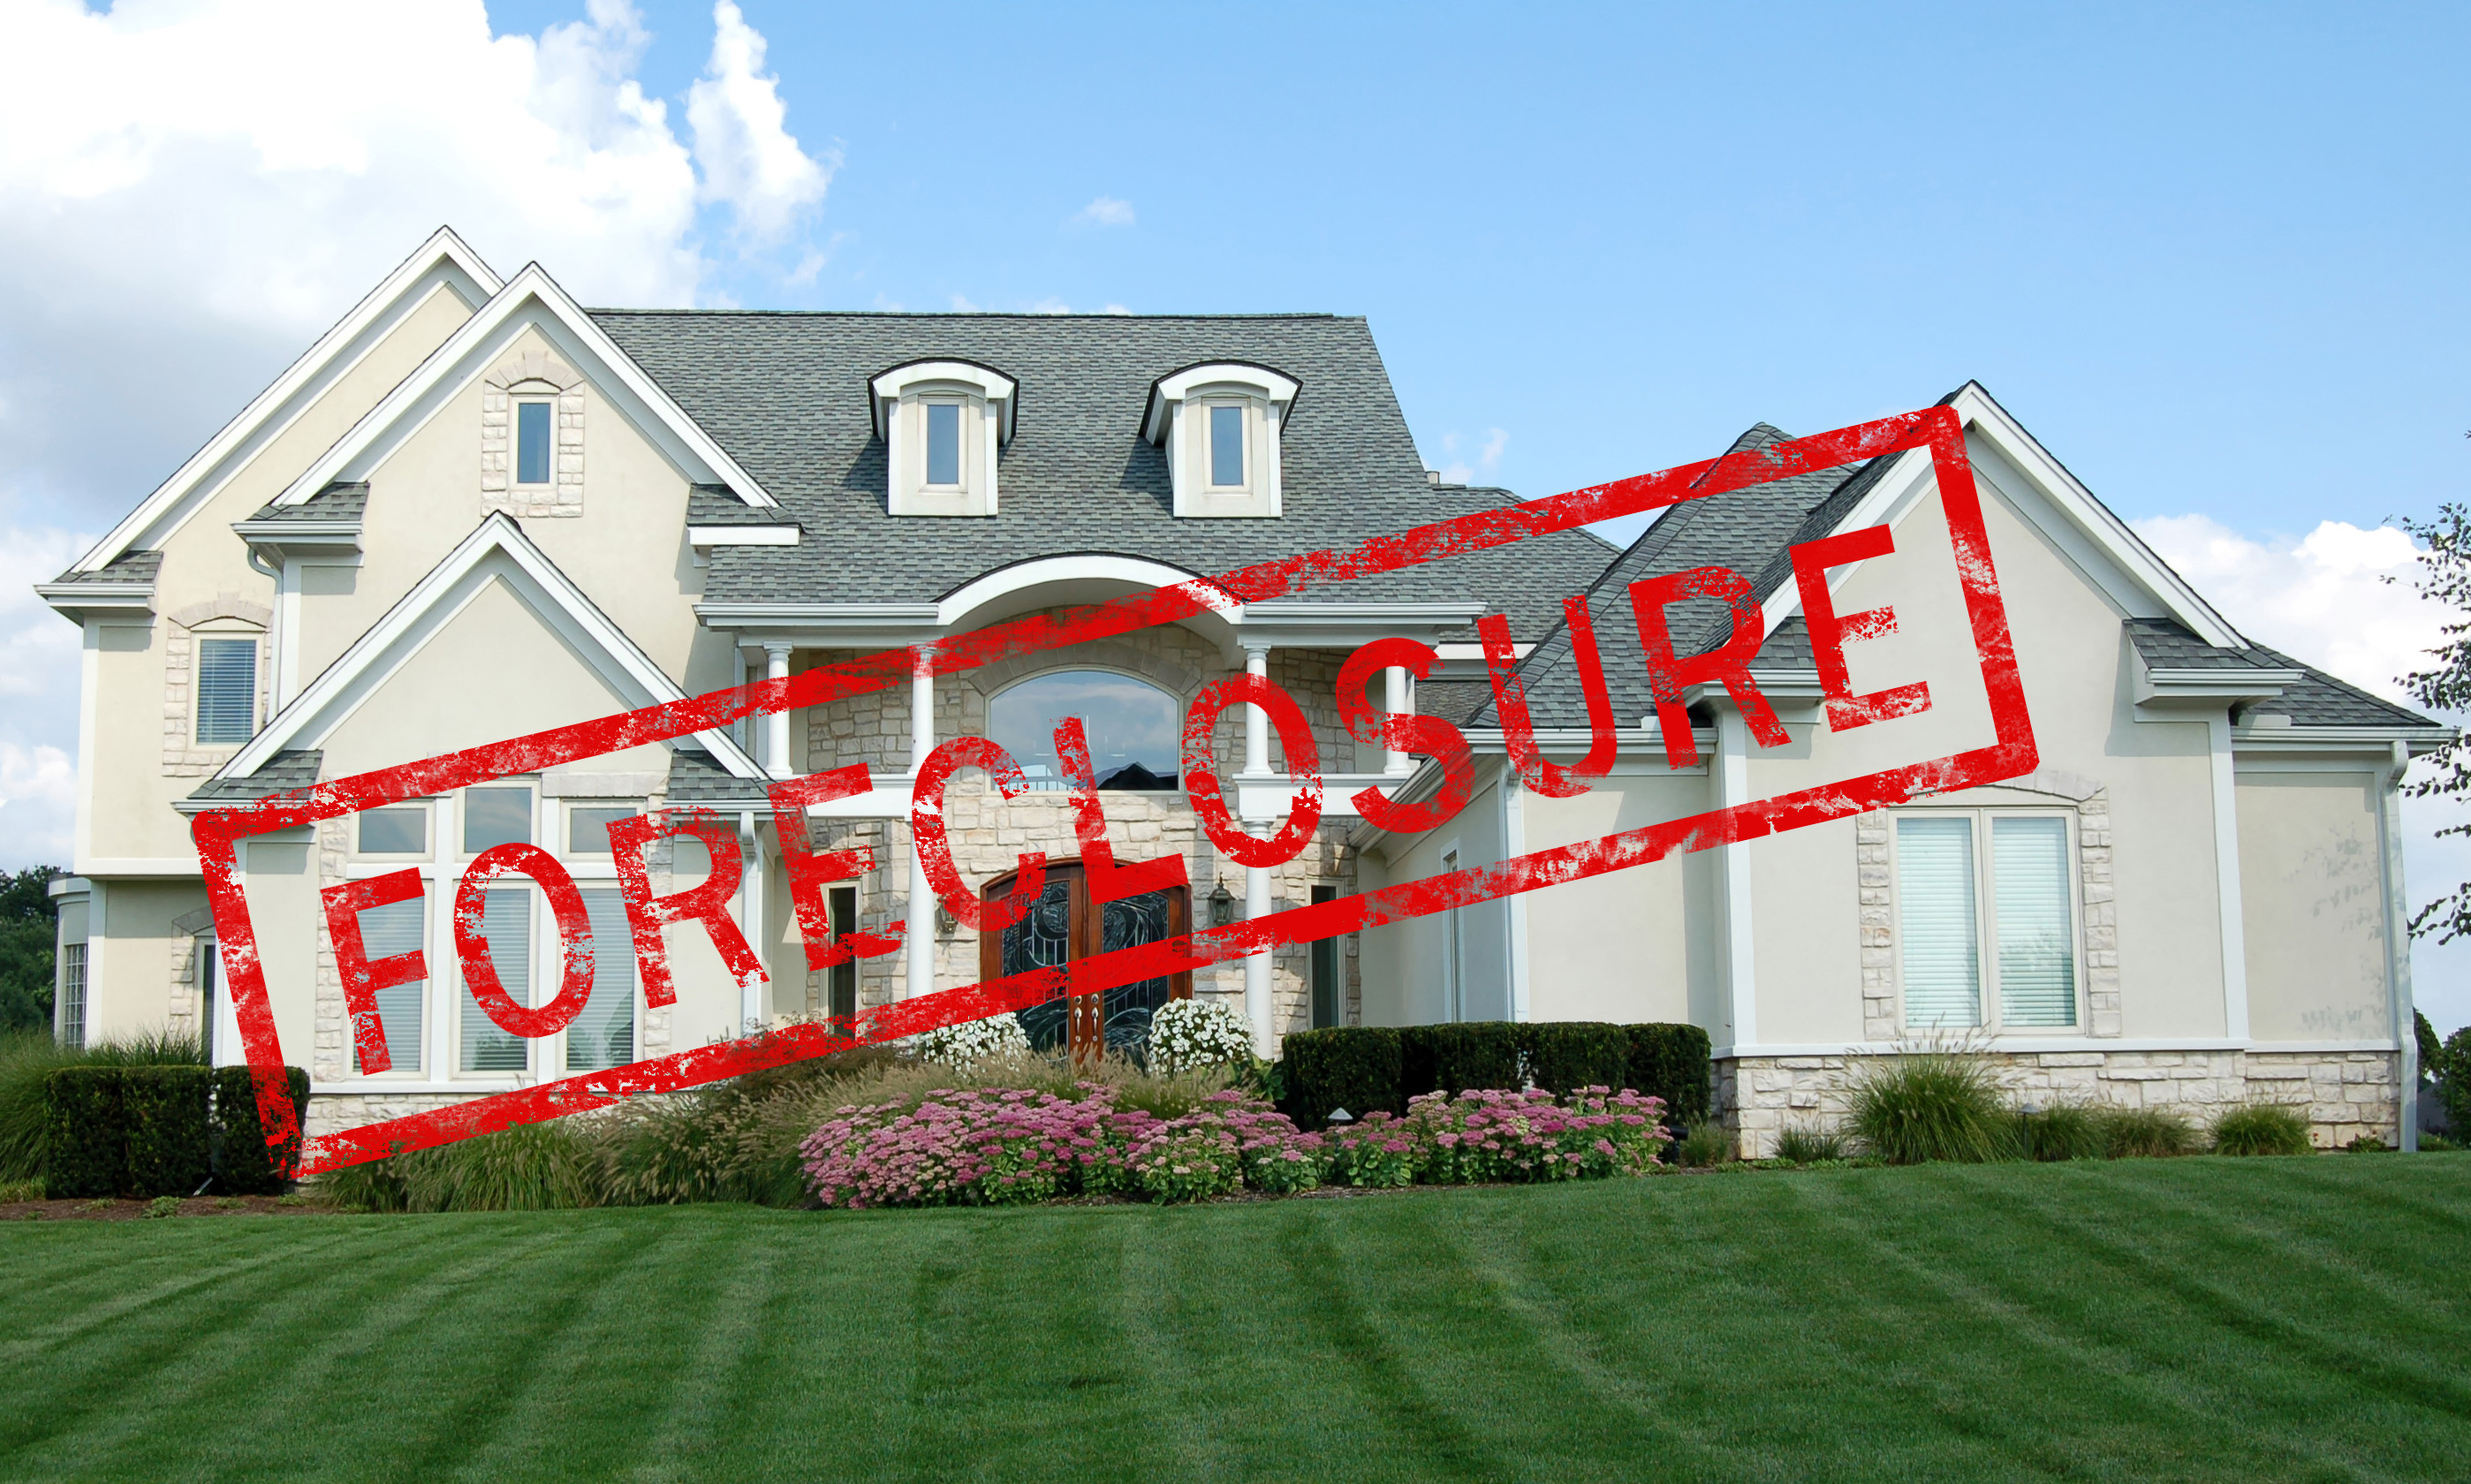 Call A.M. Appraisal to order valuations on Orange foreclosures